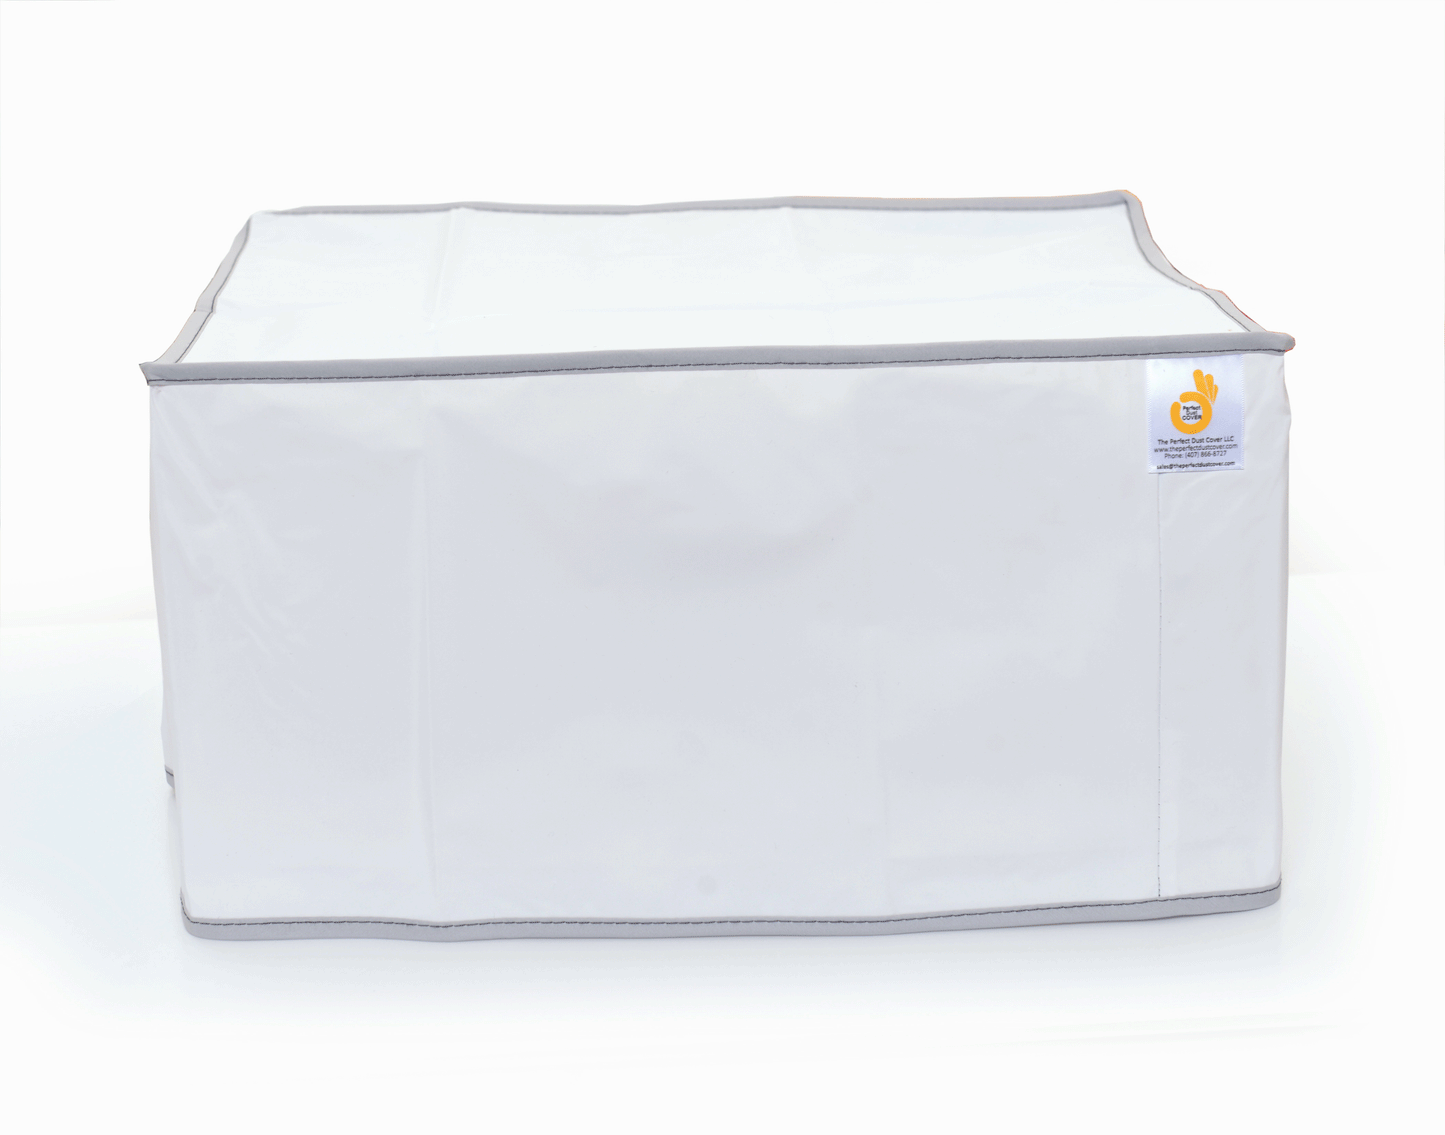 The Perfect Dust Cover, White Nylon Cover Compatible with Roland VersaSTUDIO BY-20 Desktop Direct-to-Film Printer, Anti Static, Double Stitched and Waterproof Dust Cover Dimensions 42.1''W x 24.3''D x 24.5''H by The Perfect Dust Cover LLC